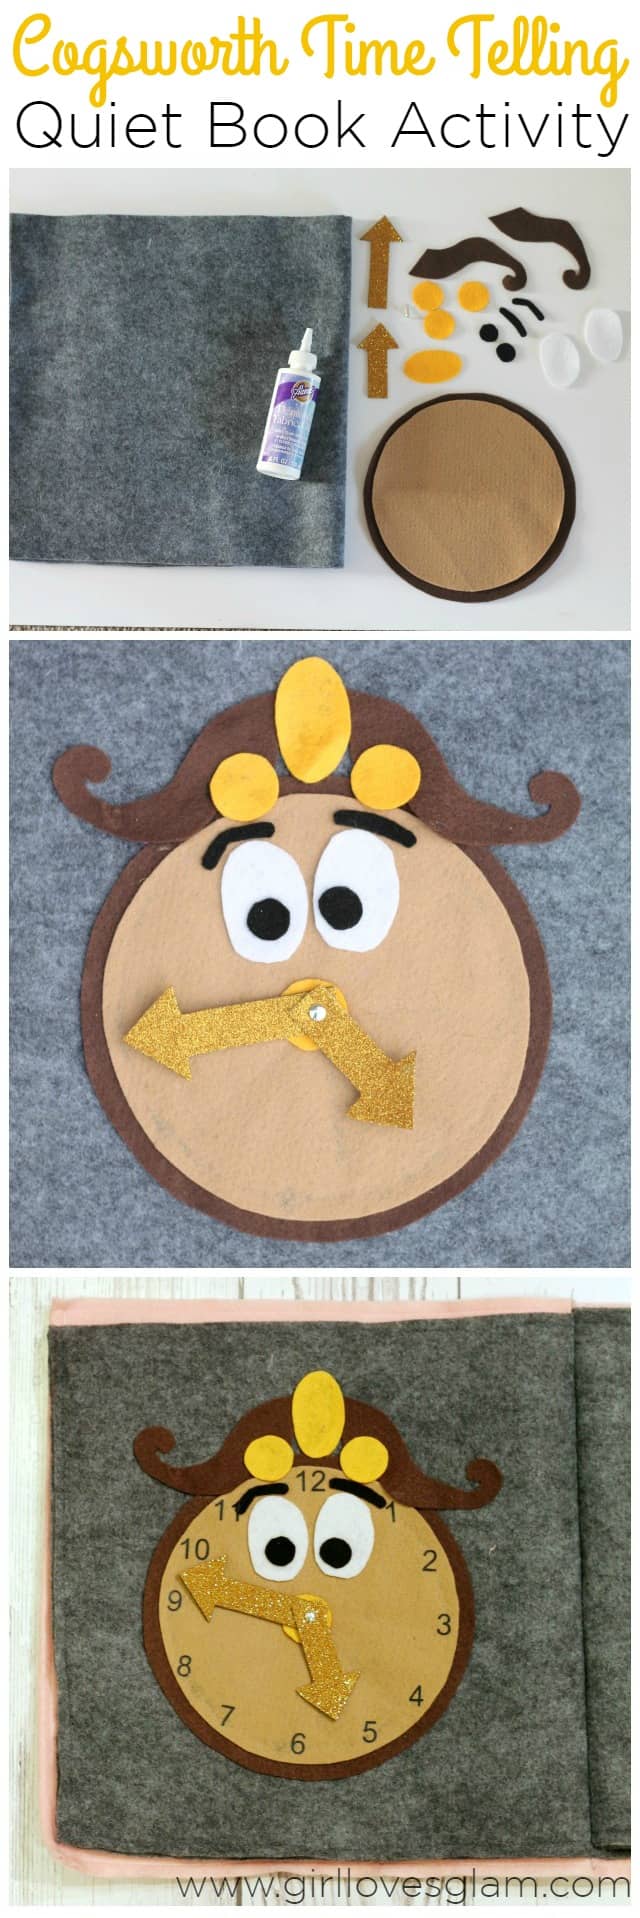 Cogsworth Time Telling Quiet Book Activity on www.girllovesglam.com